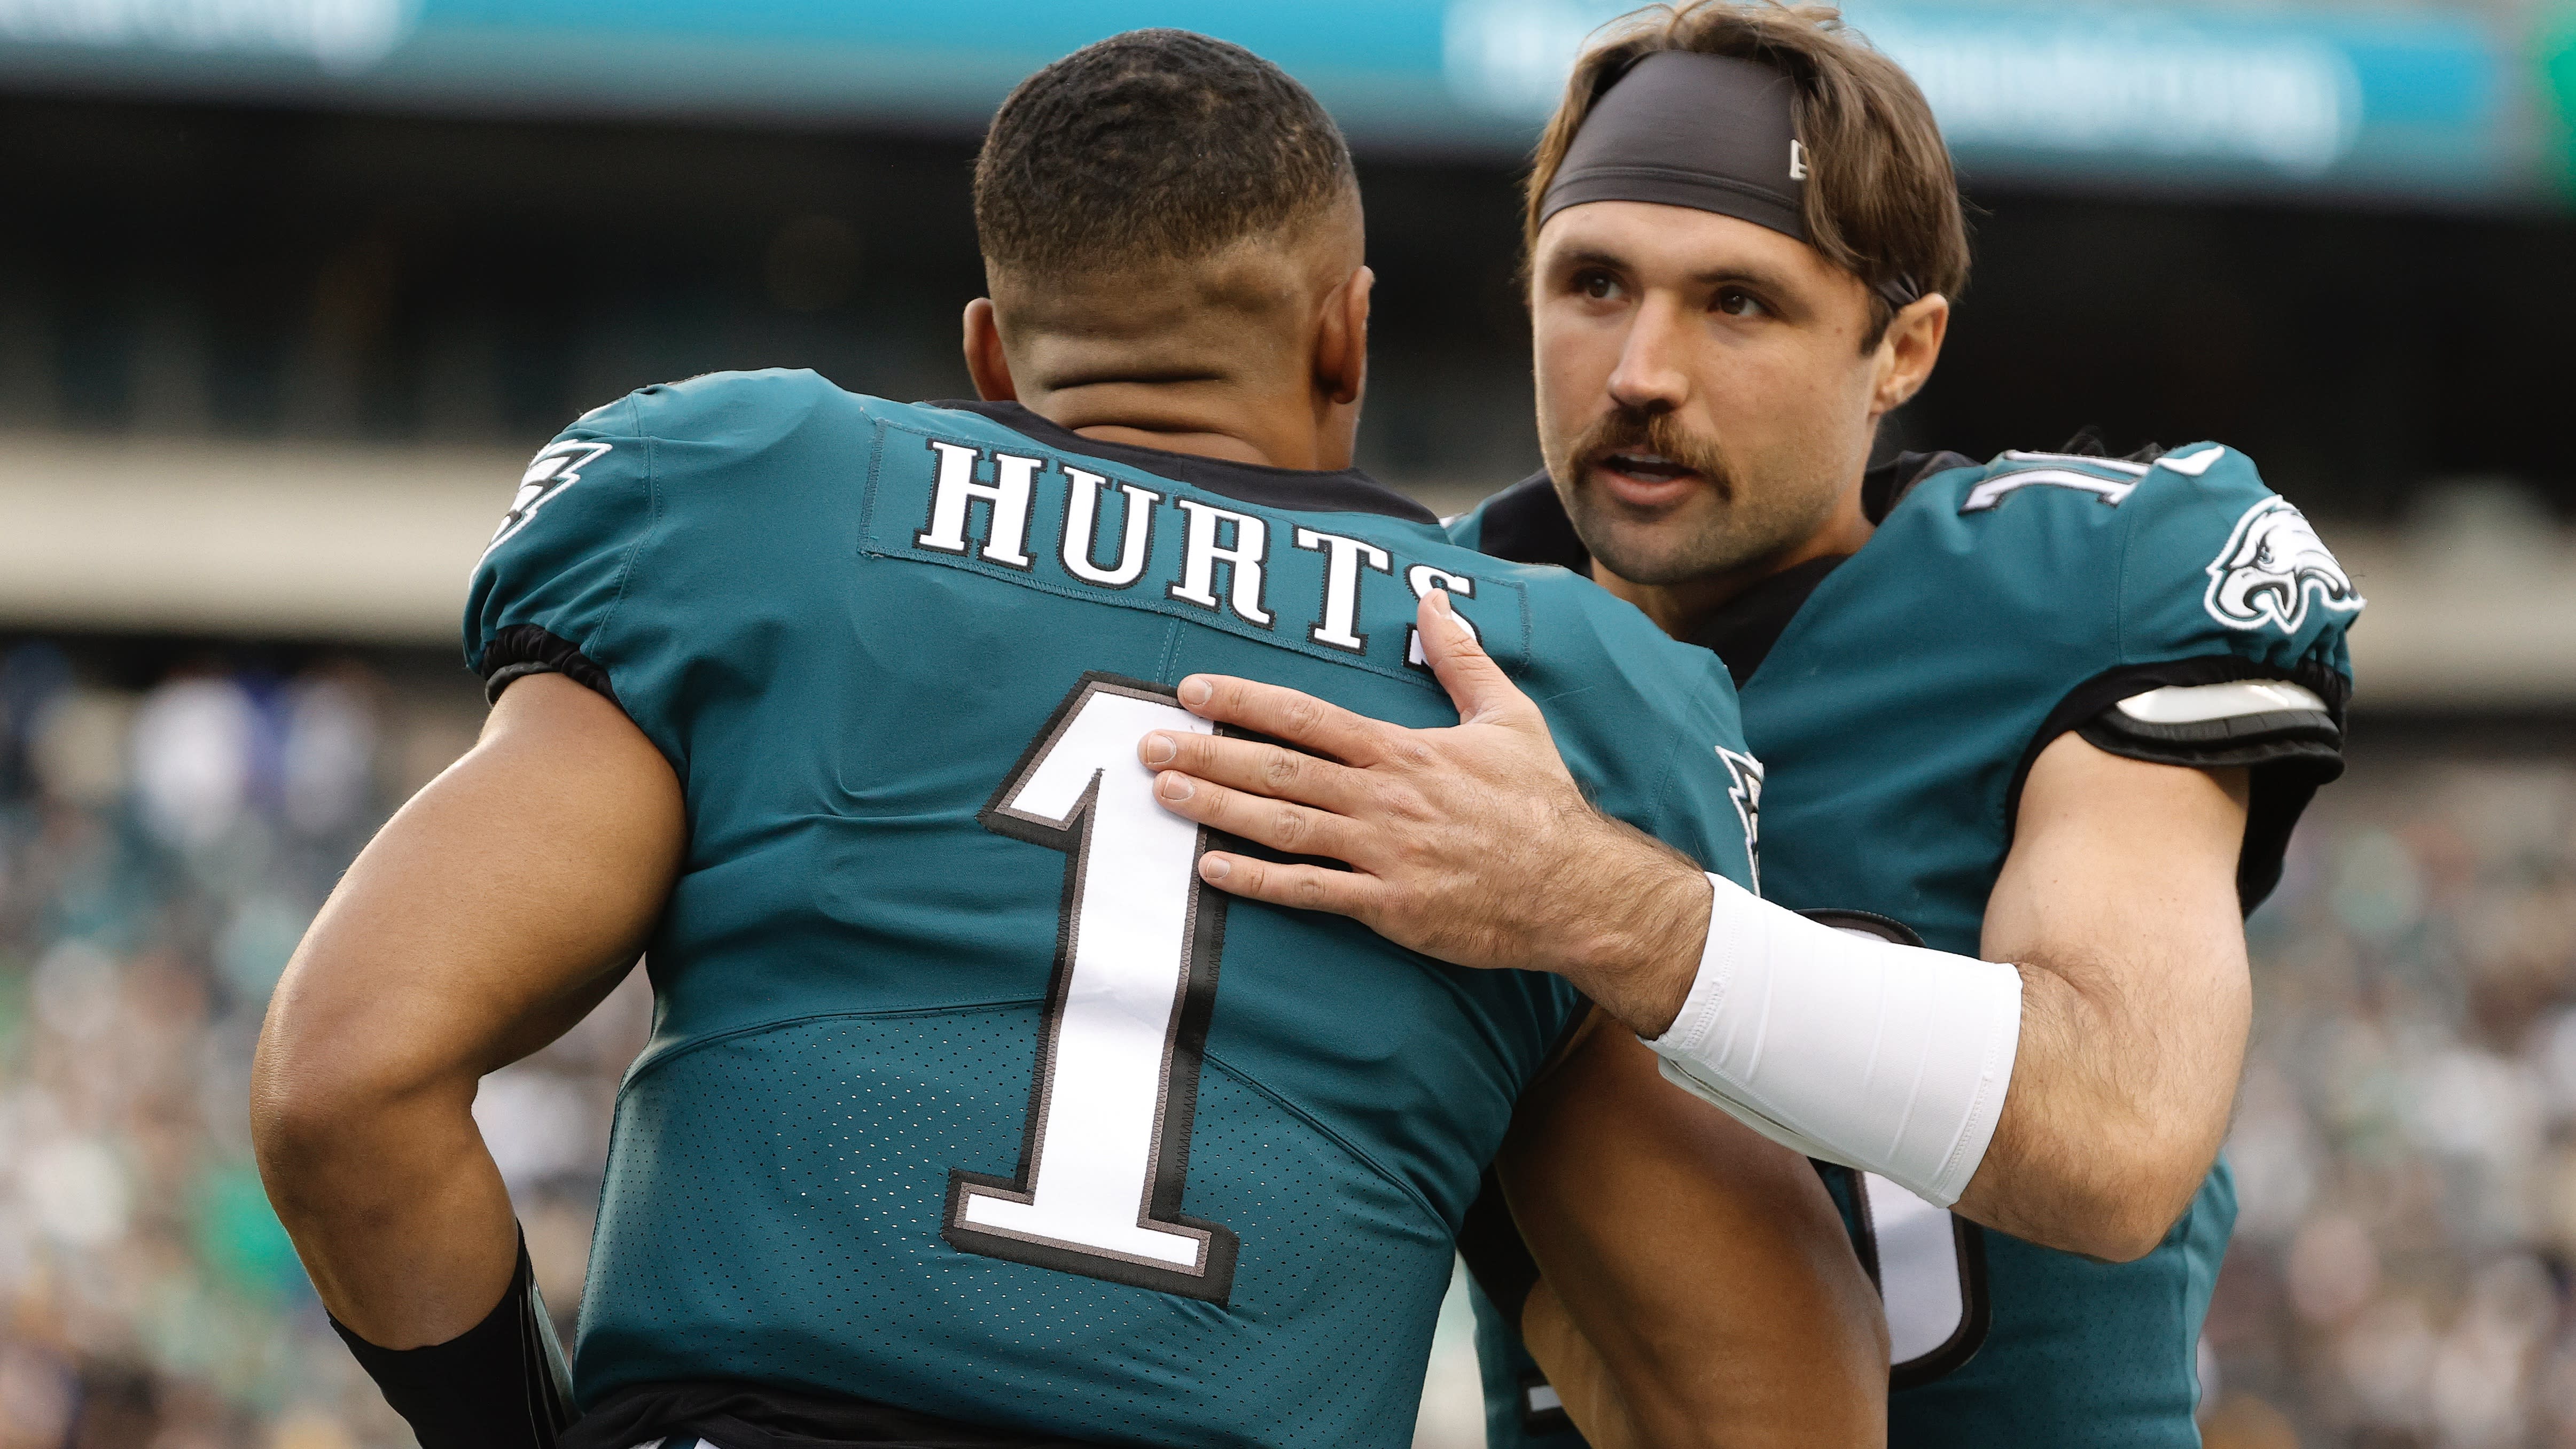 Eagles News: Jalen Hurts expected to push to play in Week 17 if